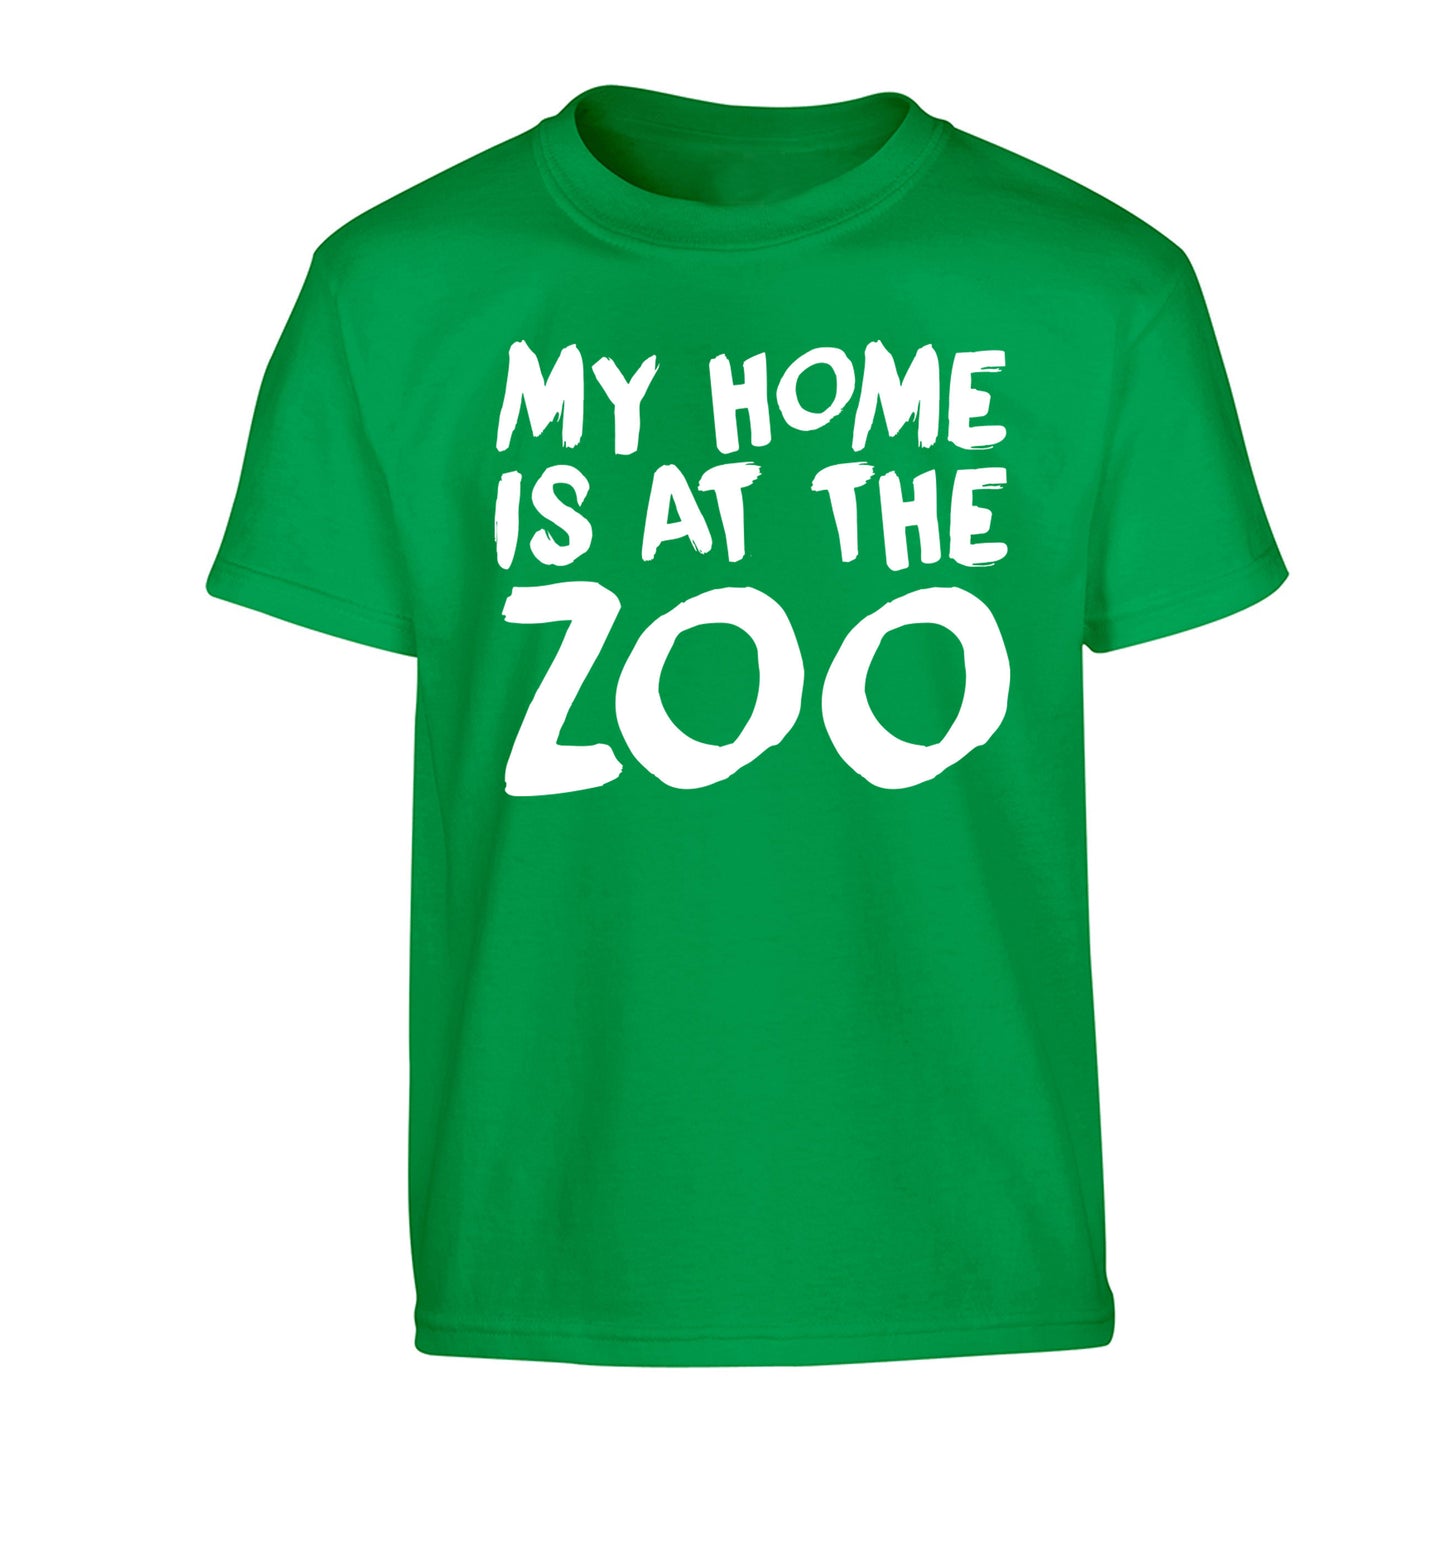 My home is at the zoo Children's green Tshirt 12-14 Years